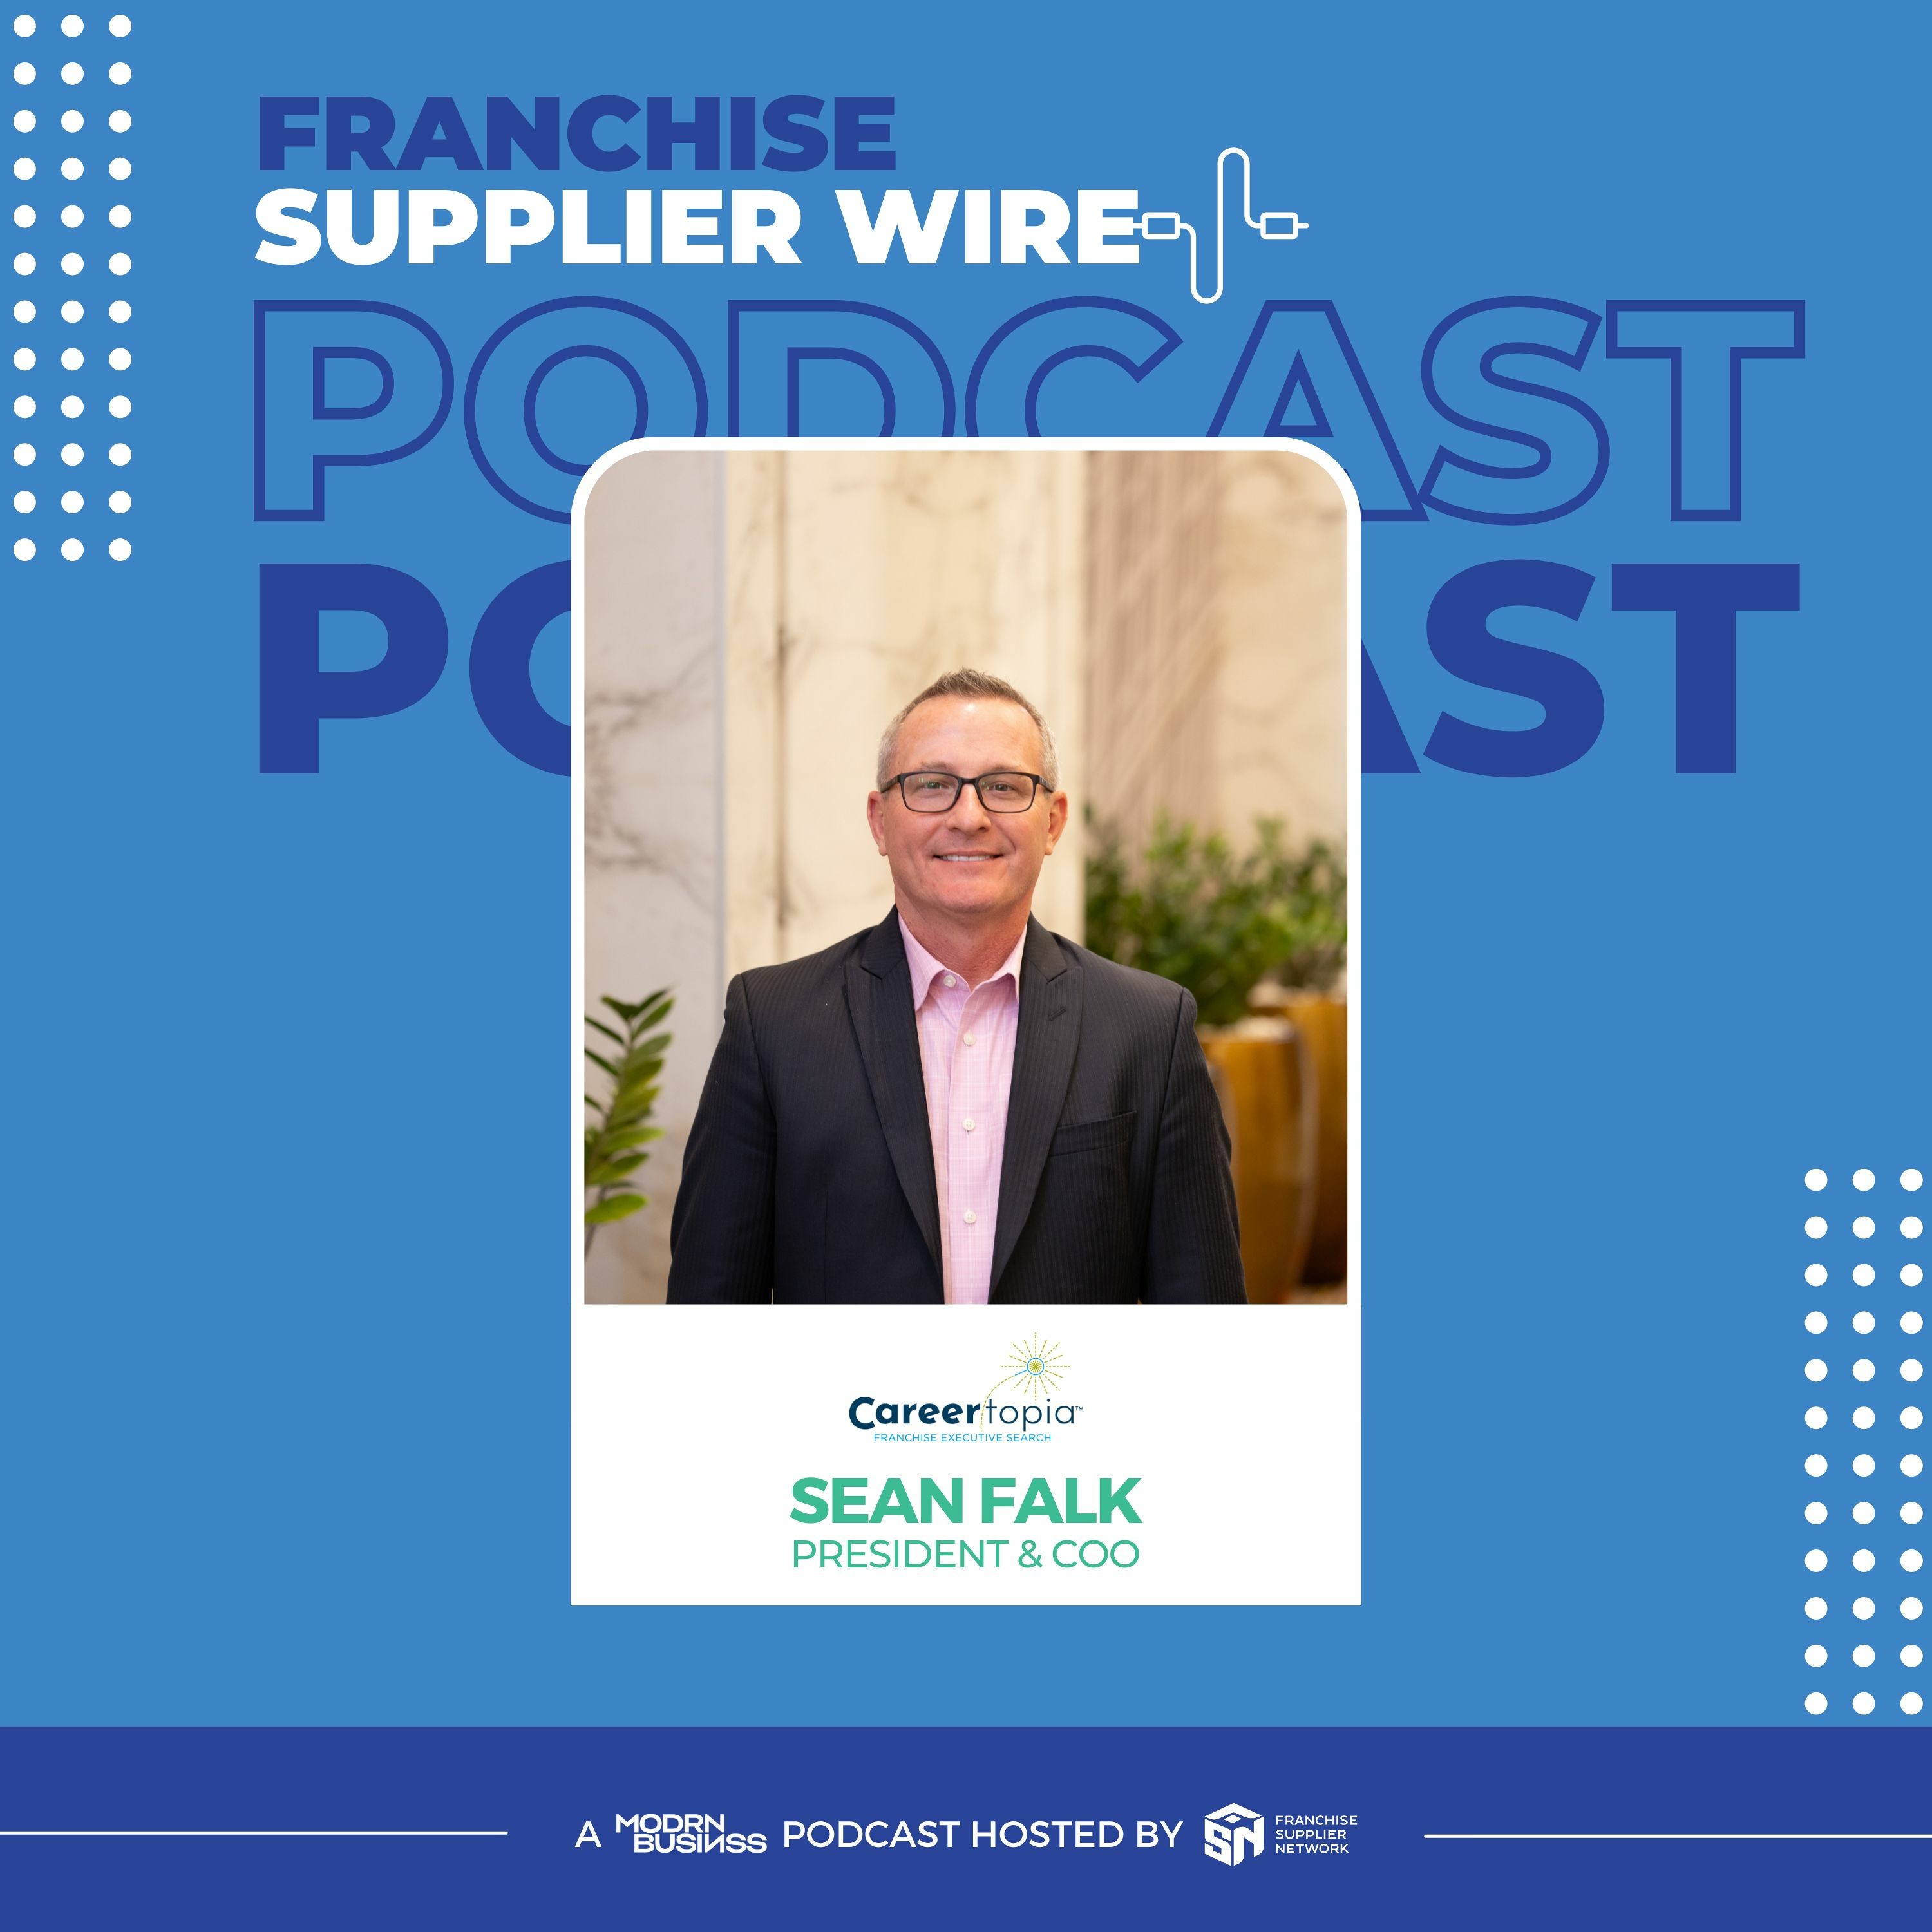 Supplier Wire 020: Finding Top Talent for Your Brand with Sean Falk